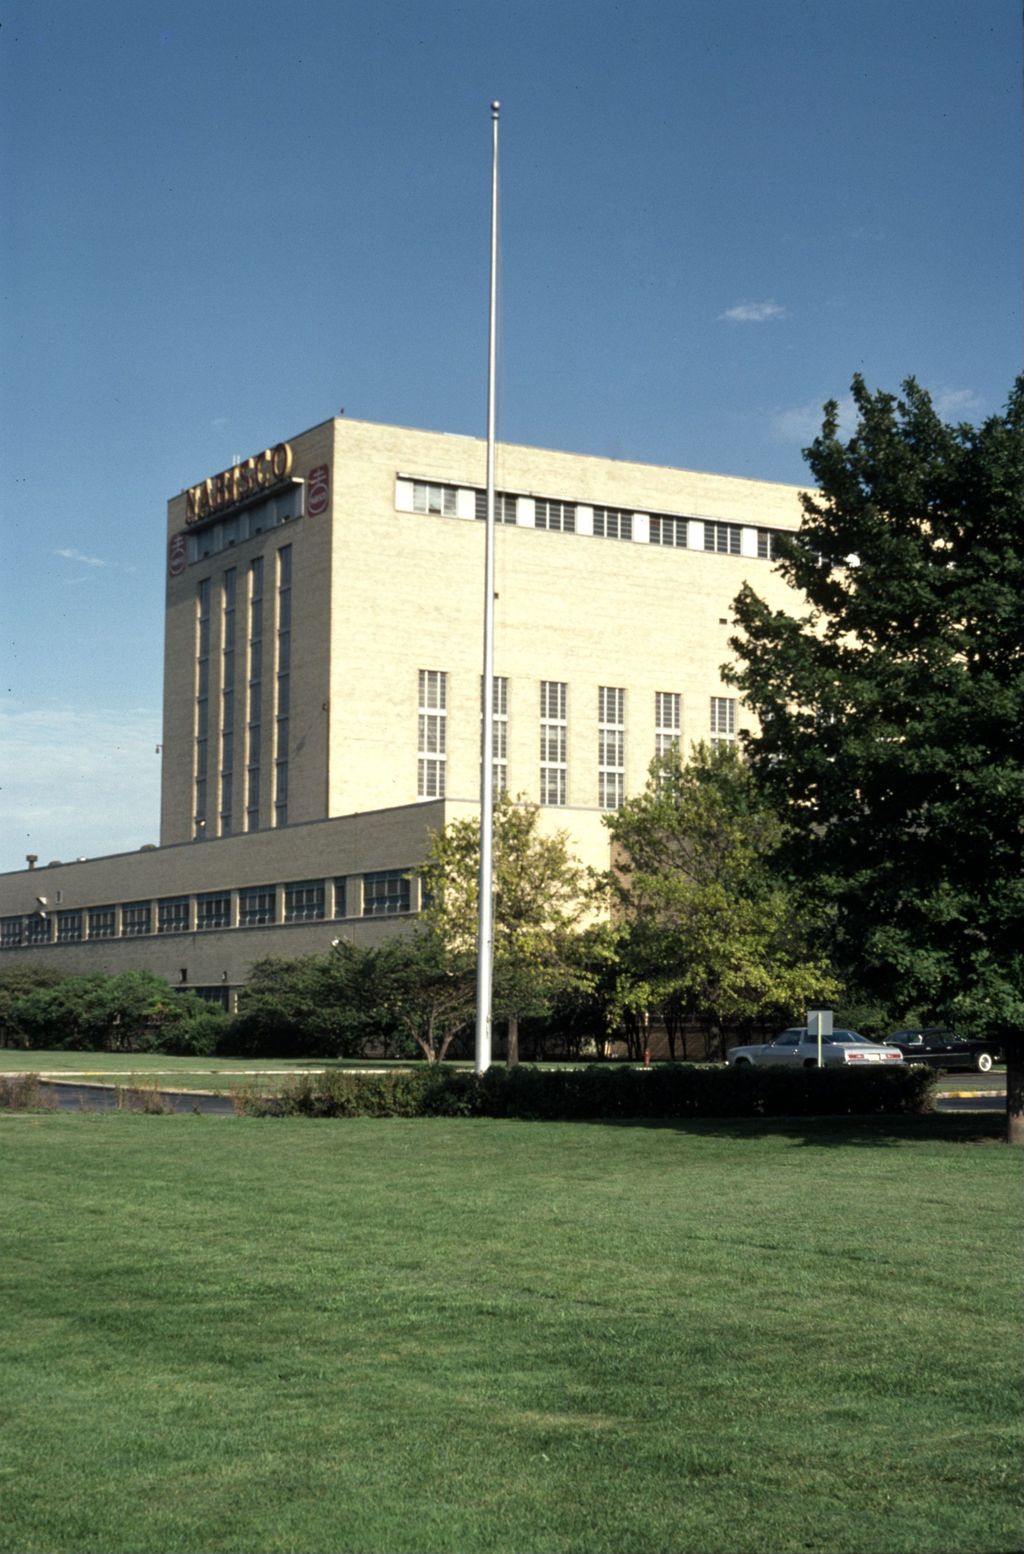 Miniature of Nabisco Biscuit Company plant